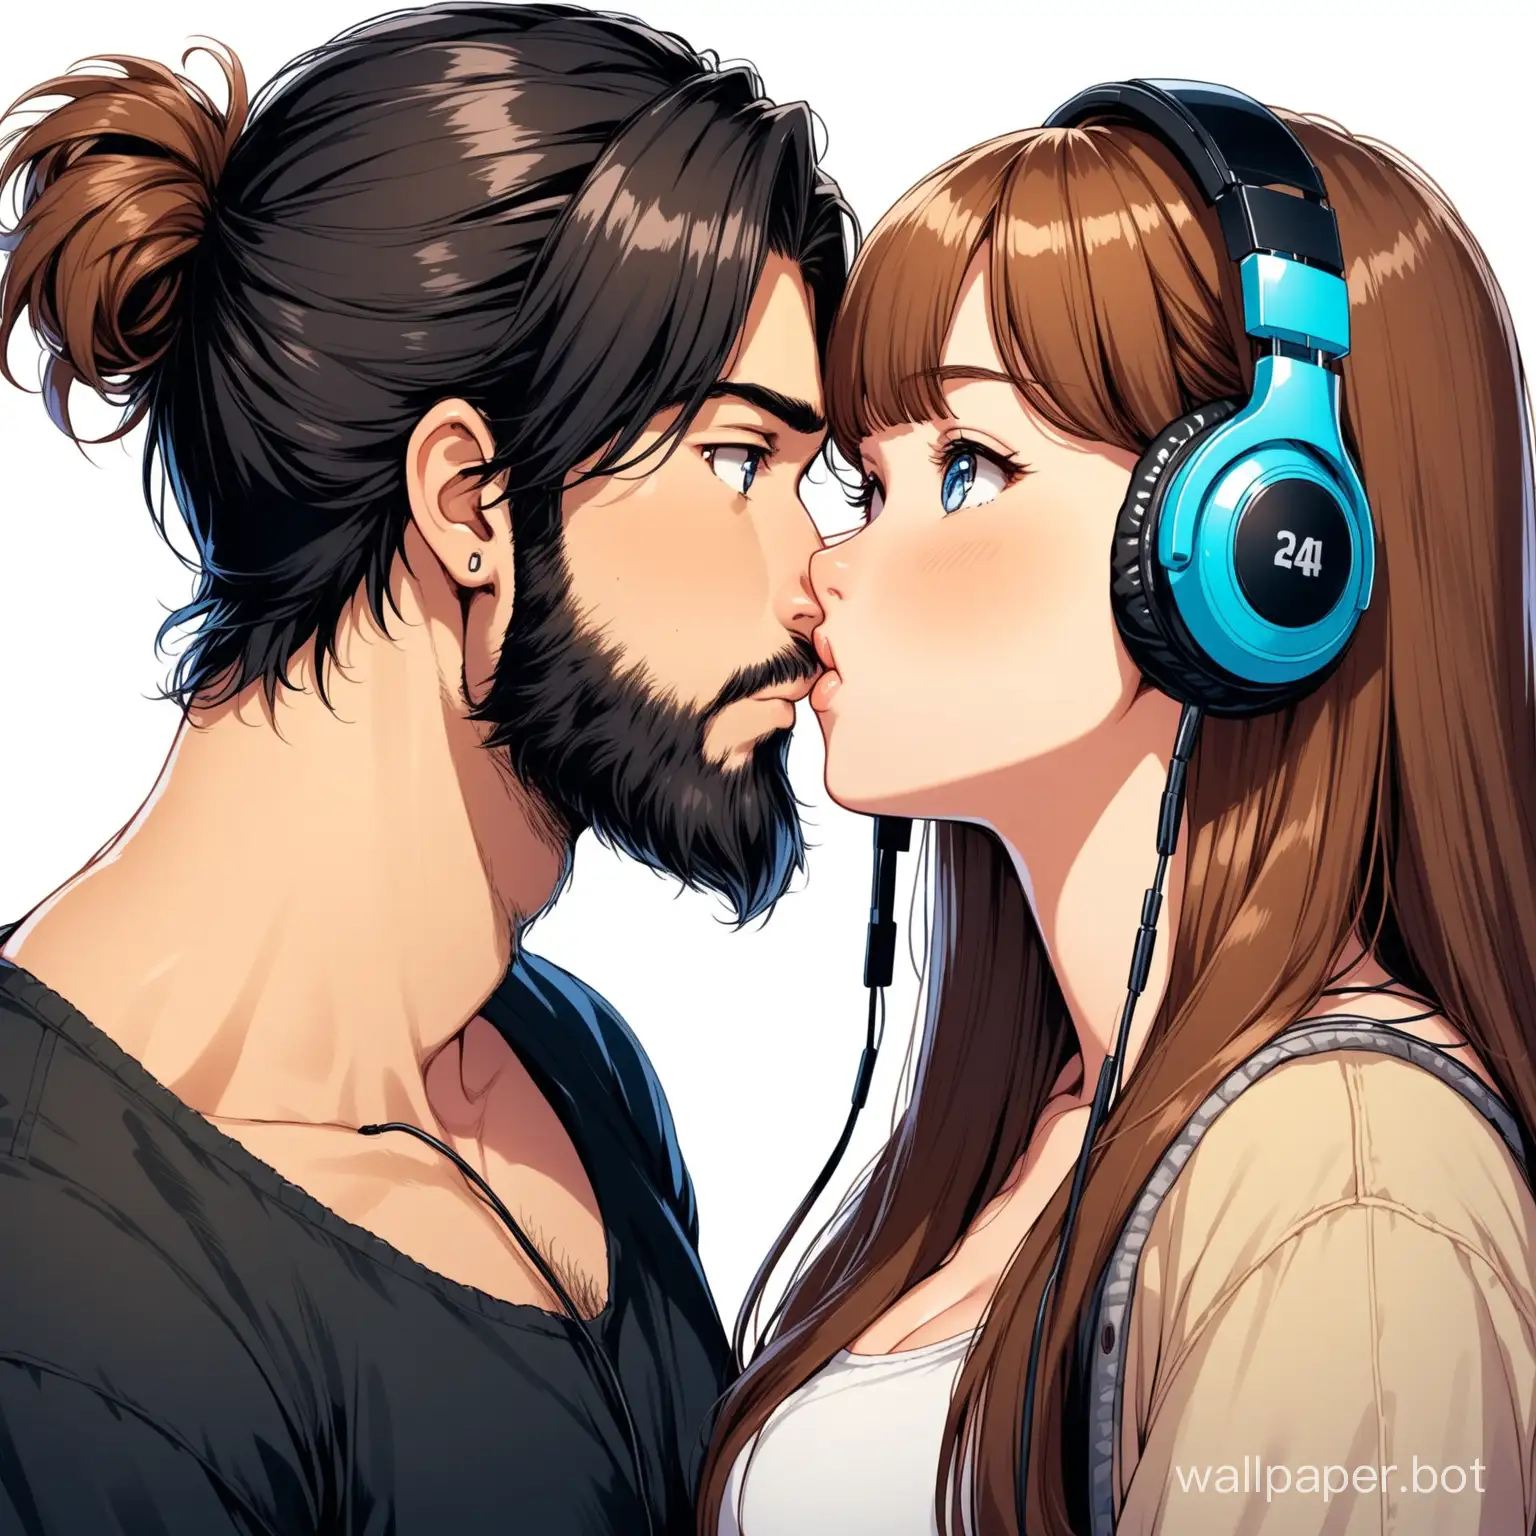 a chubby face with chubby cheeks cute 24 year old hippie girl blue eyes long brown hair with bangs kissing a 24 year old handsome male with black hair in a manbun and a scruffy black colored beard with his hazel eyes while having headphones on